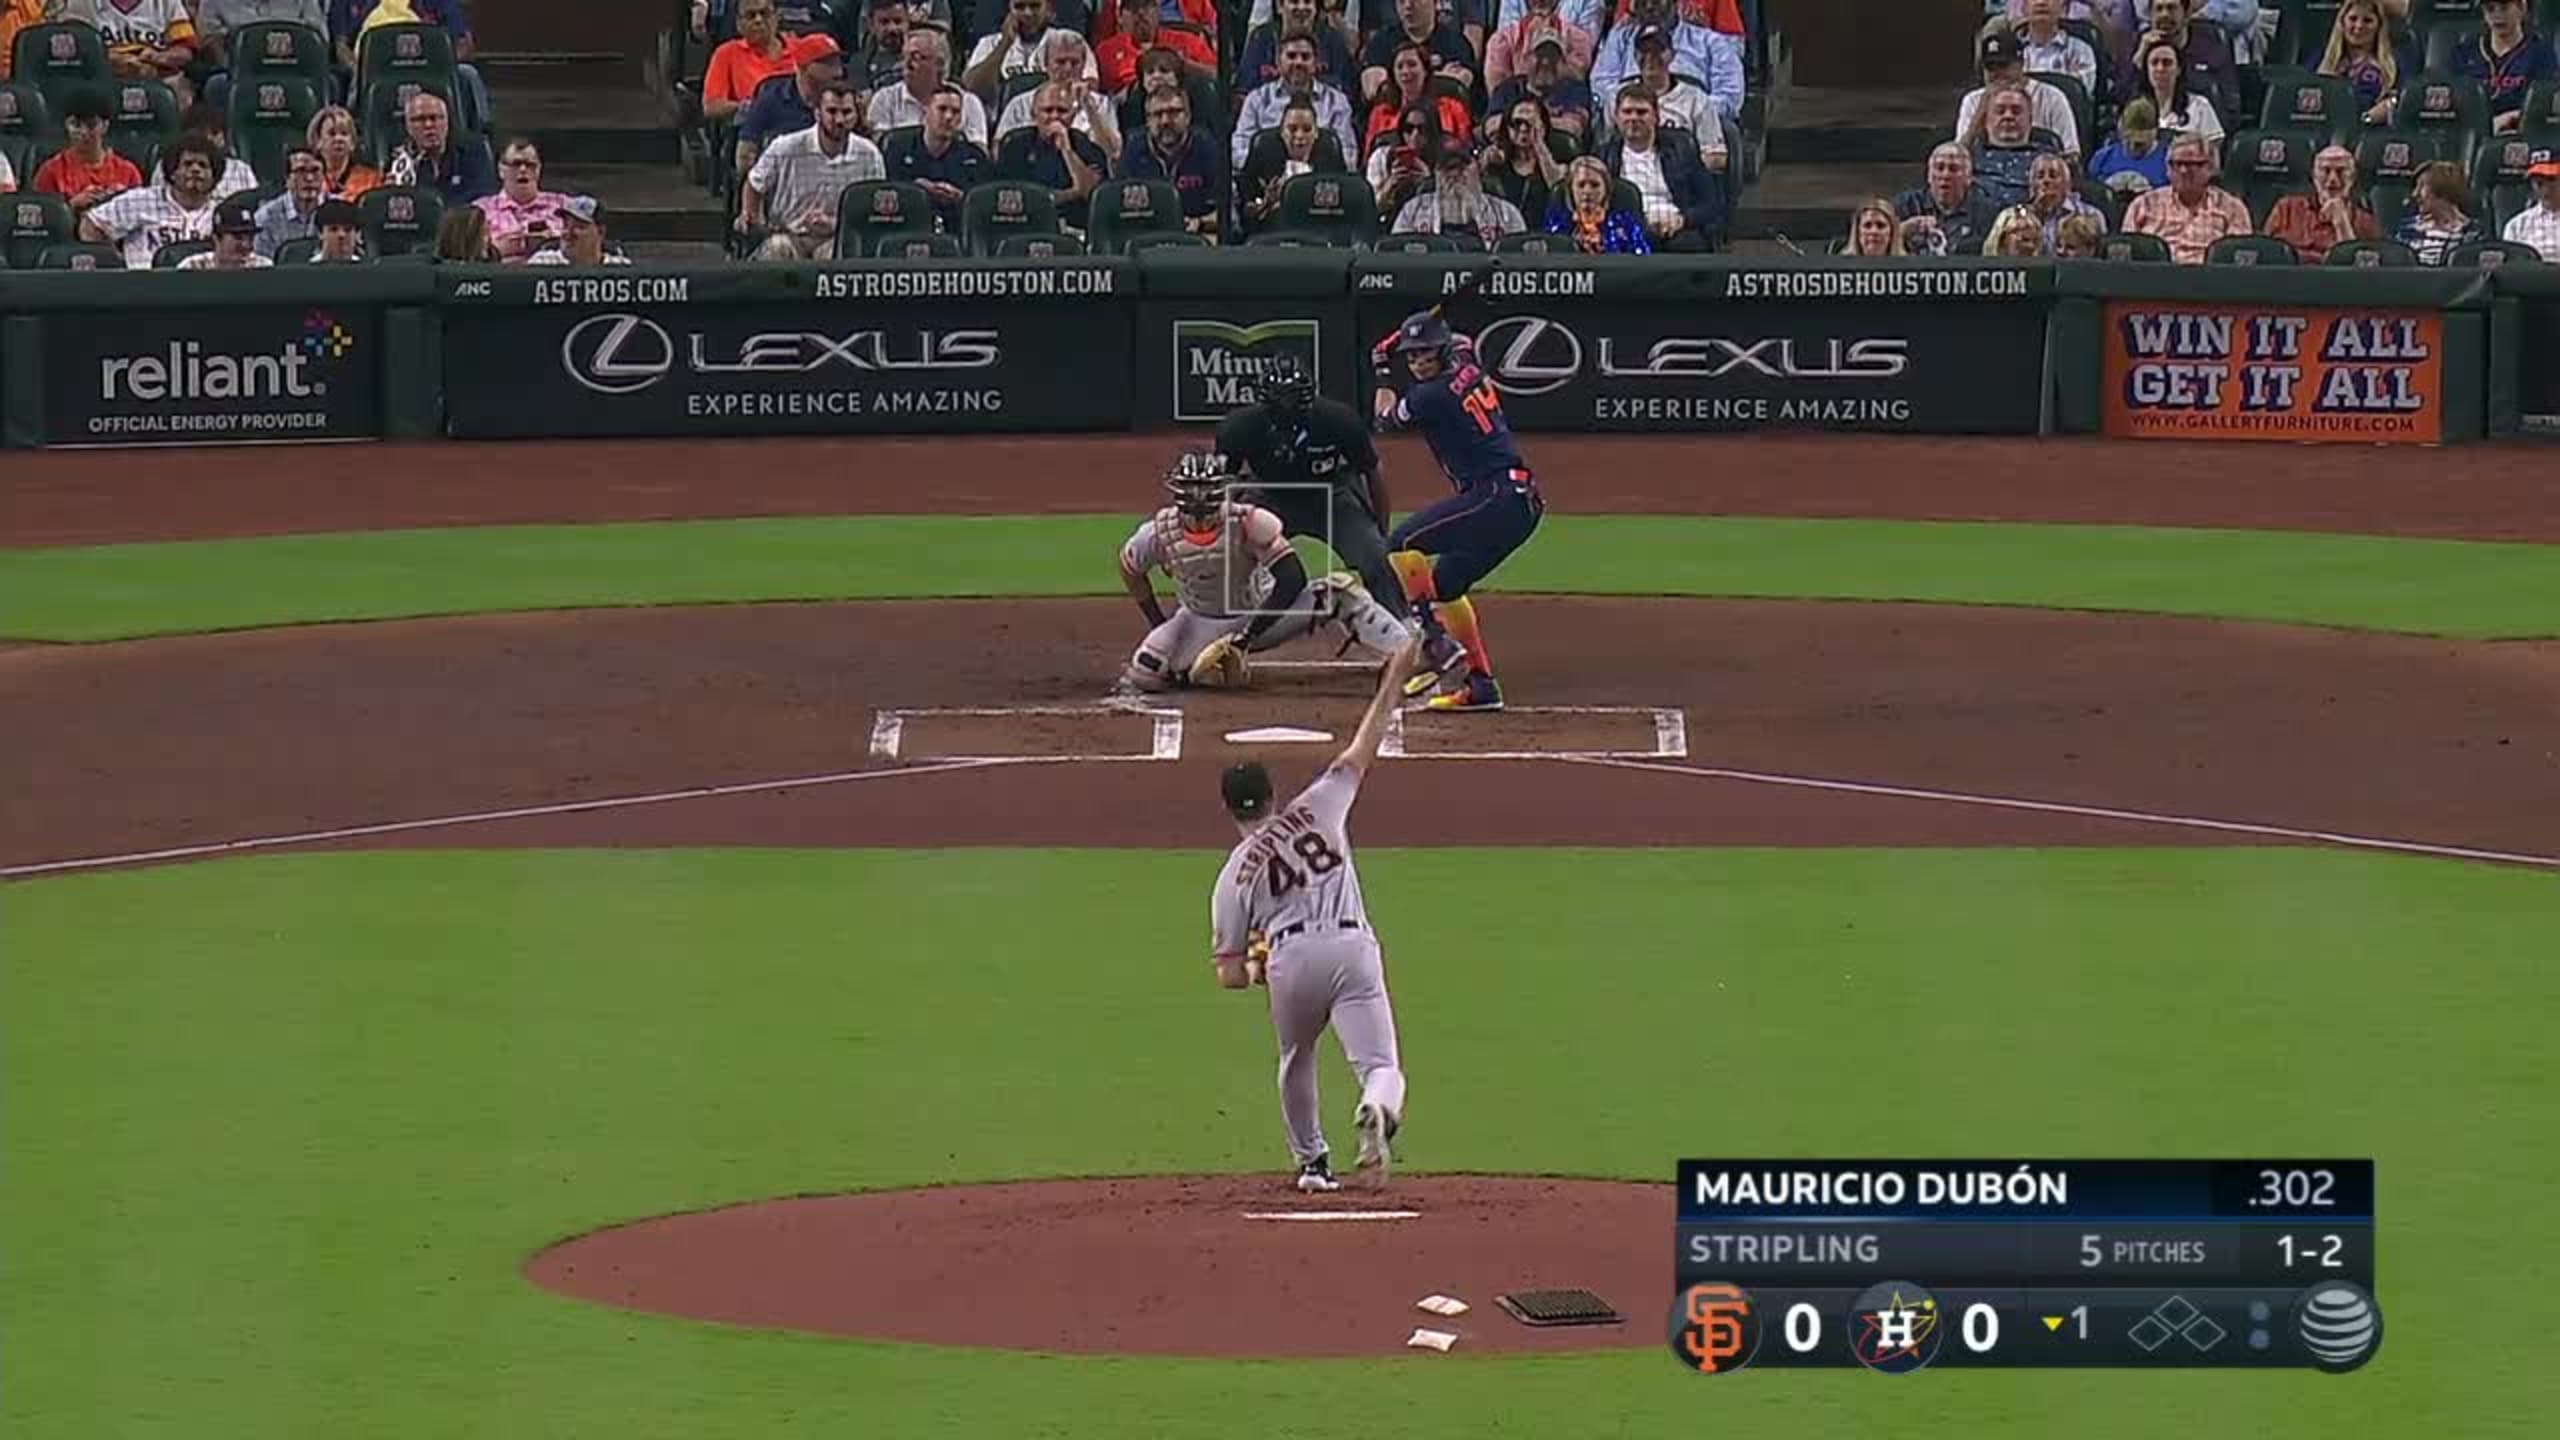 Astros' Mauricio Dubón is one hit away from making history